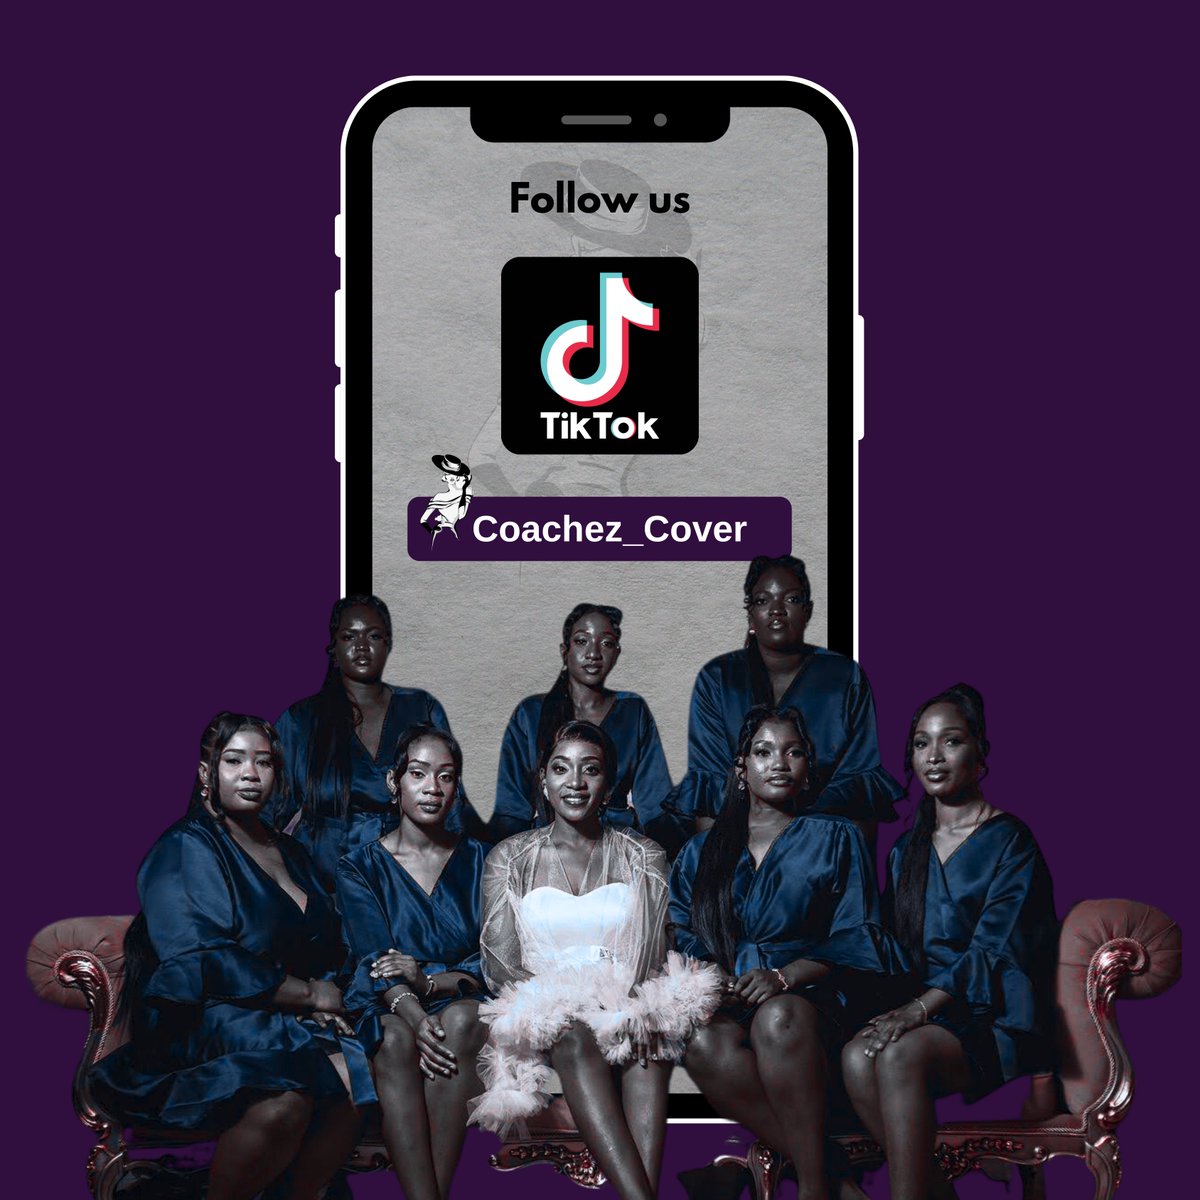 Hi, check out Coachez Cover on TikTok  

Like our work and kindly share with friends. #coachezcover #cocogirl #africanfashion #ghanafashion #ghanawedding #churchdress #trendylook